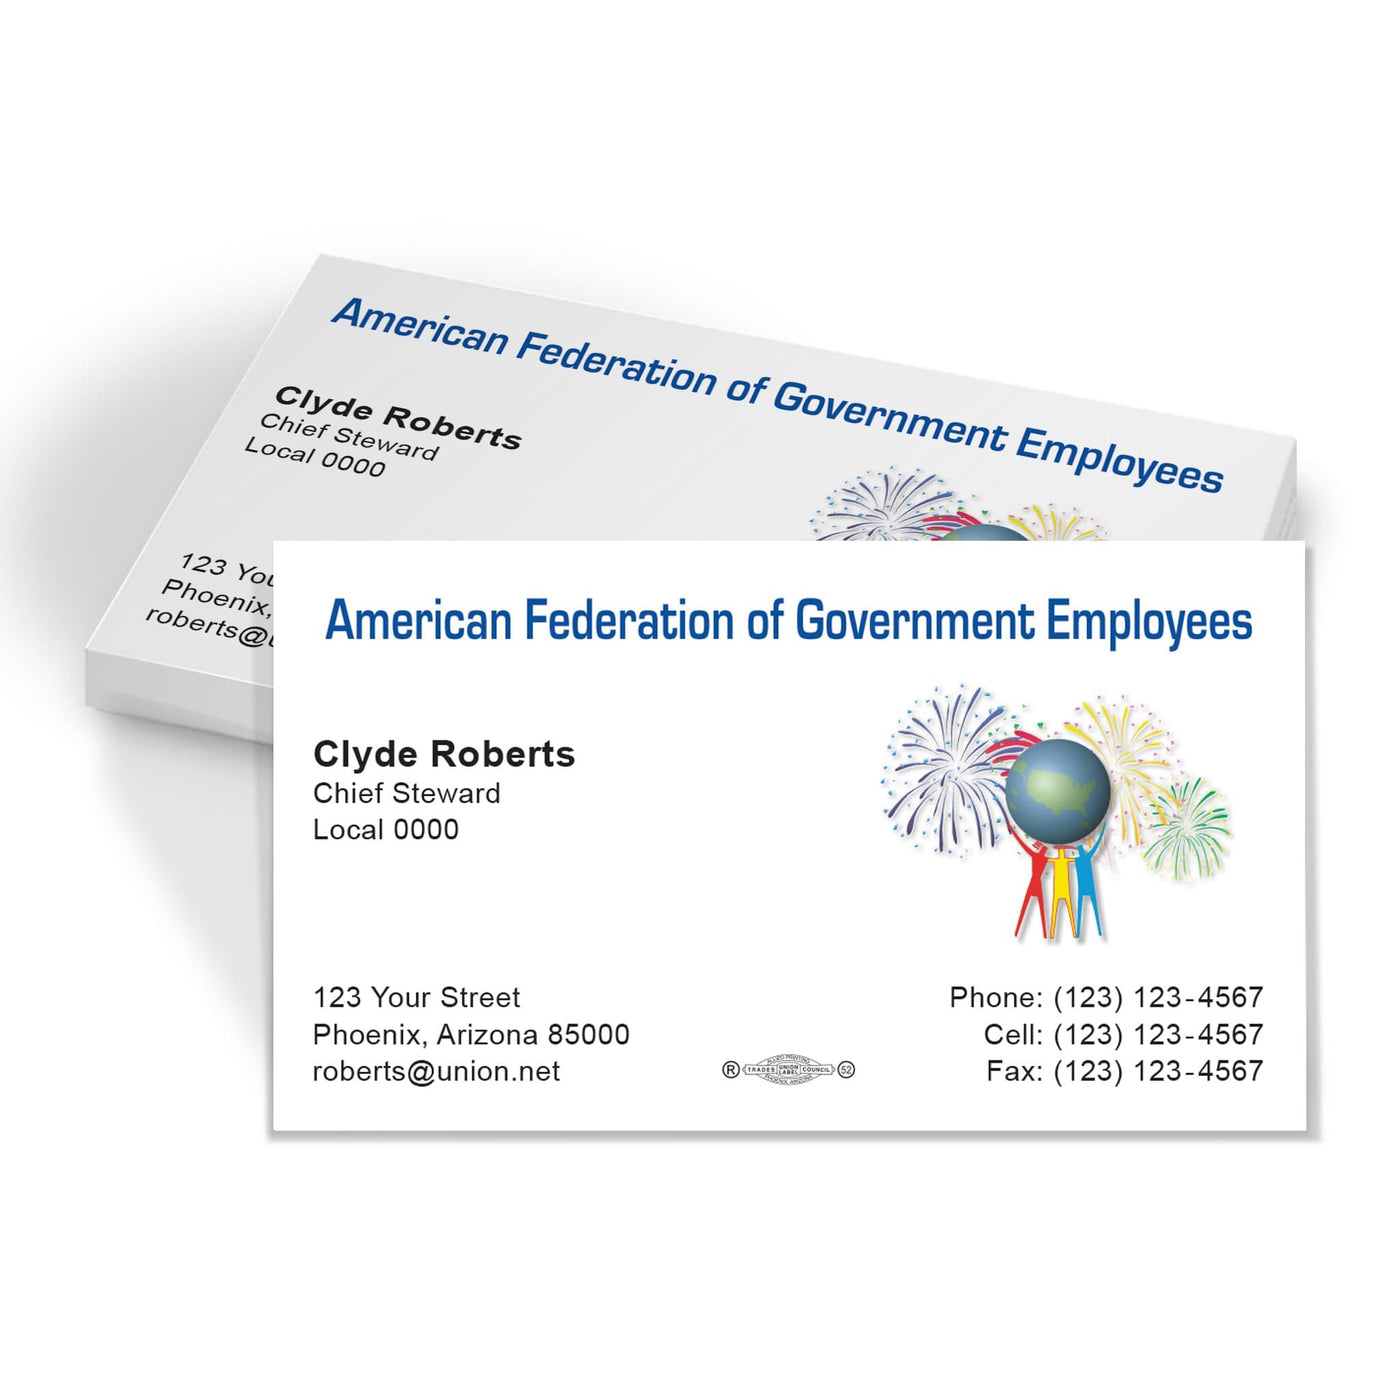 AFGE Union Printed business with Union label 